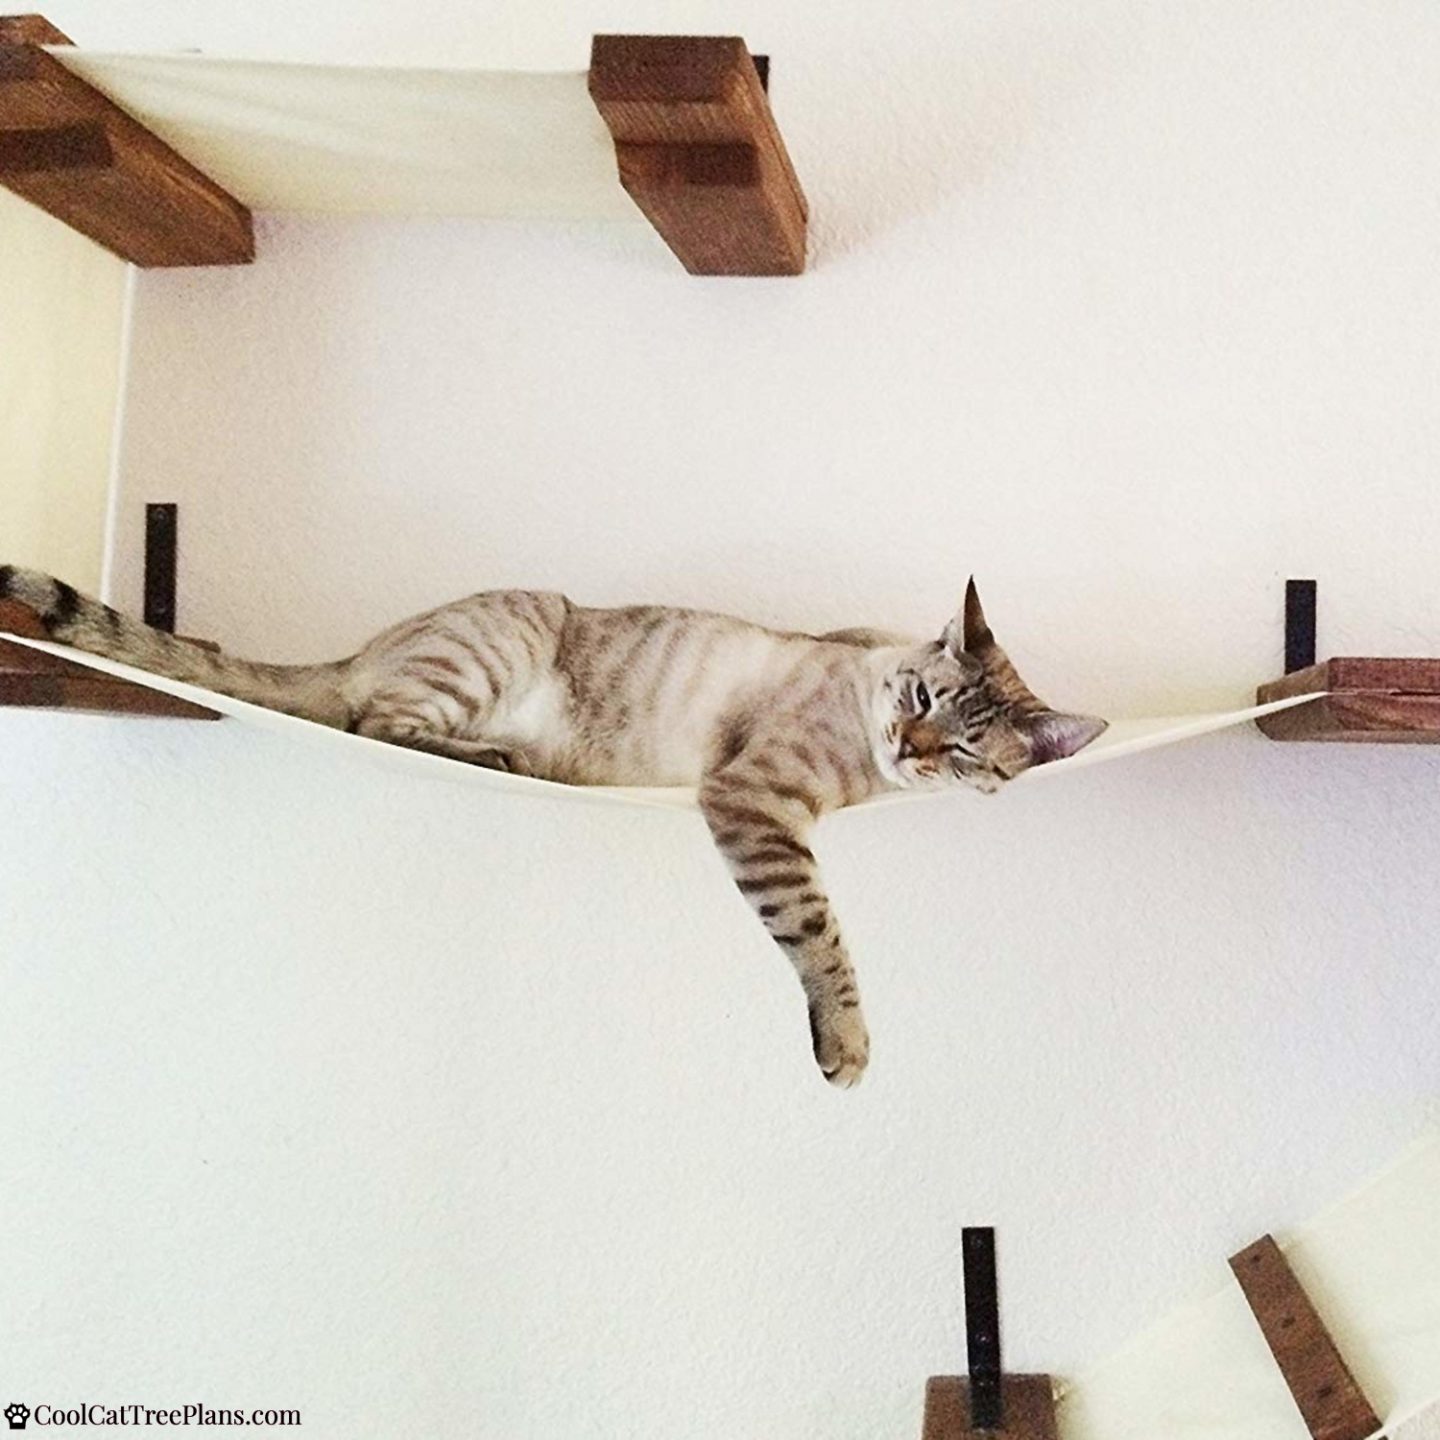 A good sized, double decker cat wall shelf for your cats to lounge and play on.  It's not going to take up the whole wall, but it's more than just a hammock!